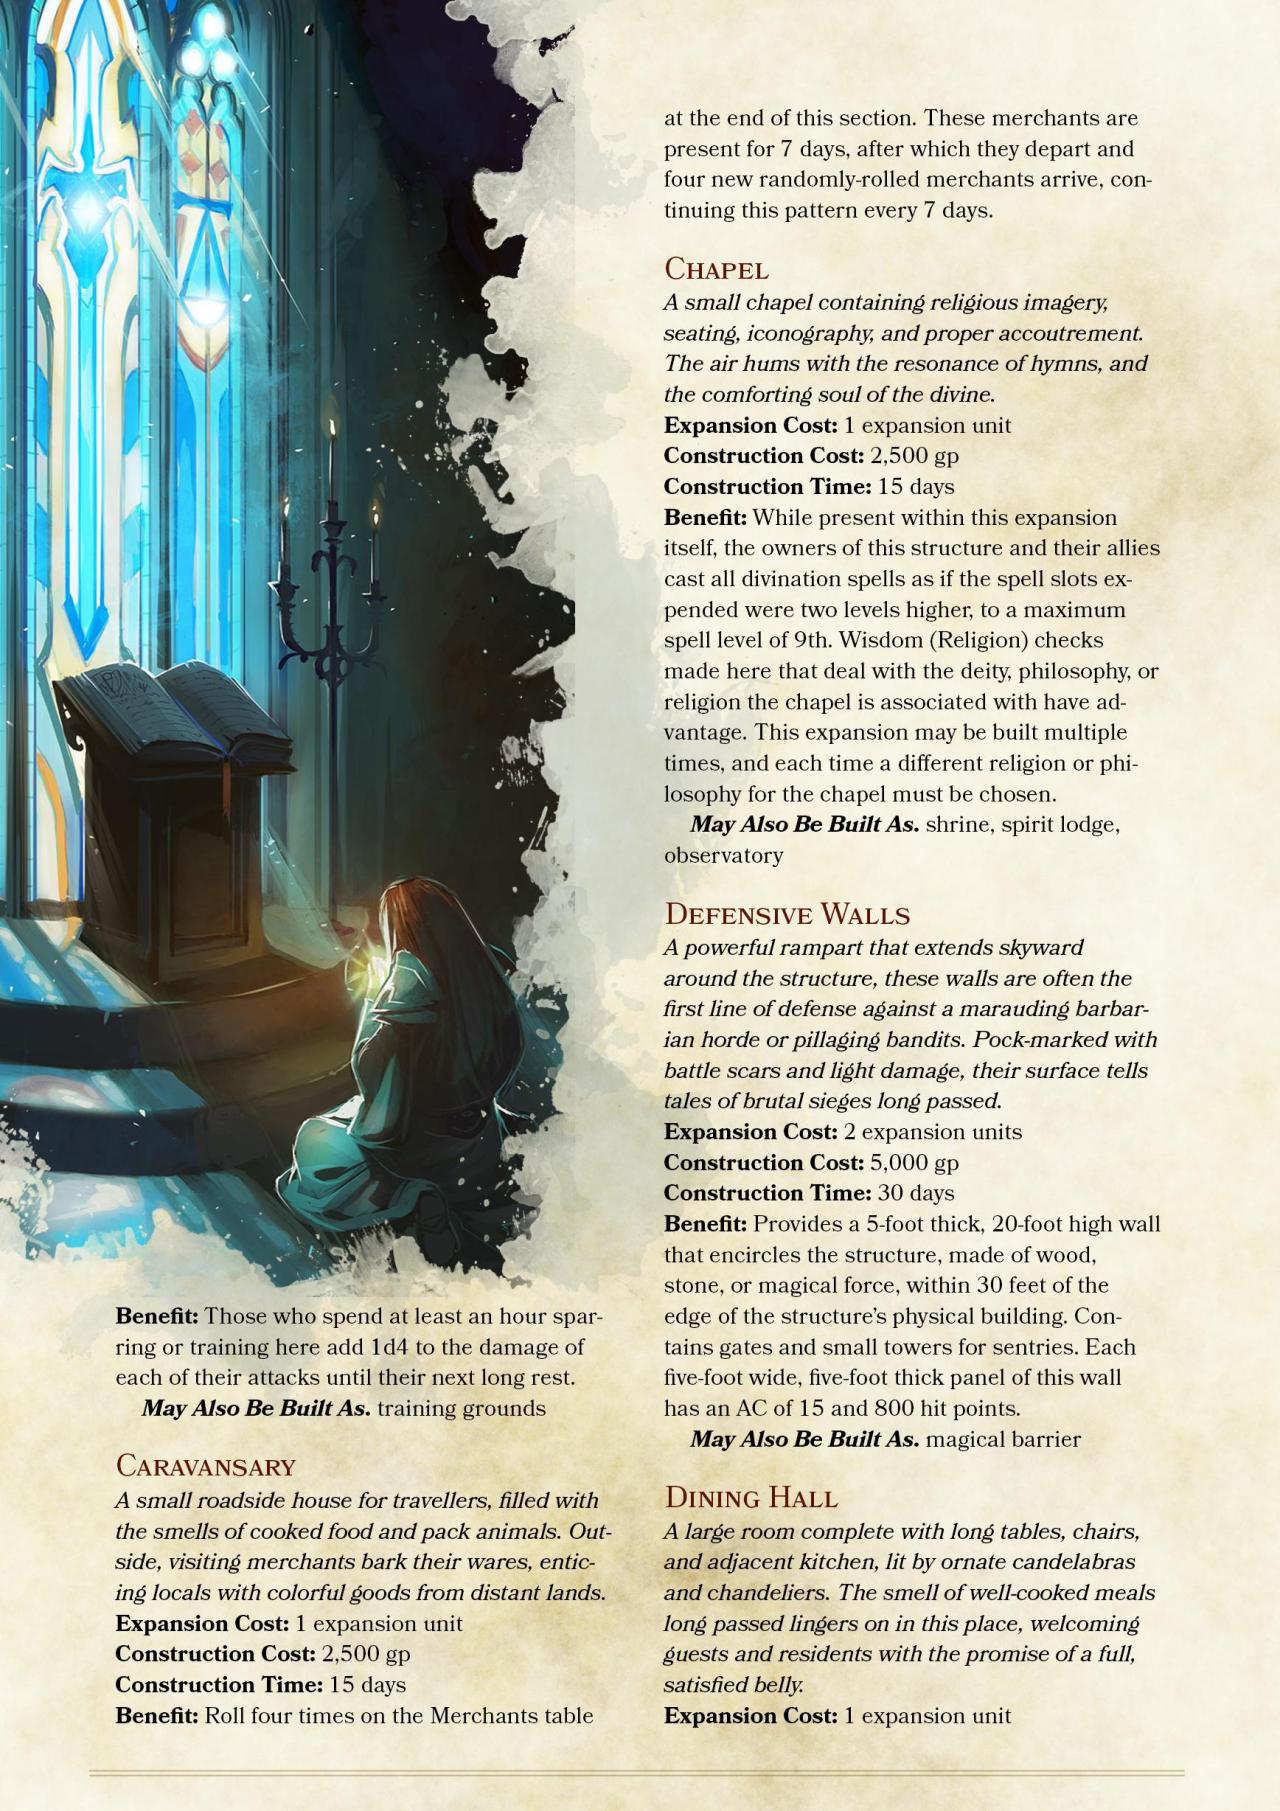 WH} Fortresses, Temples, & Strongholds, rules for building and